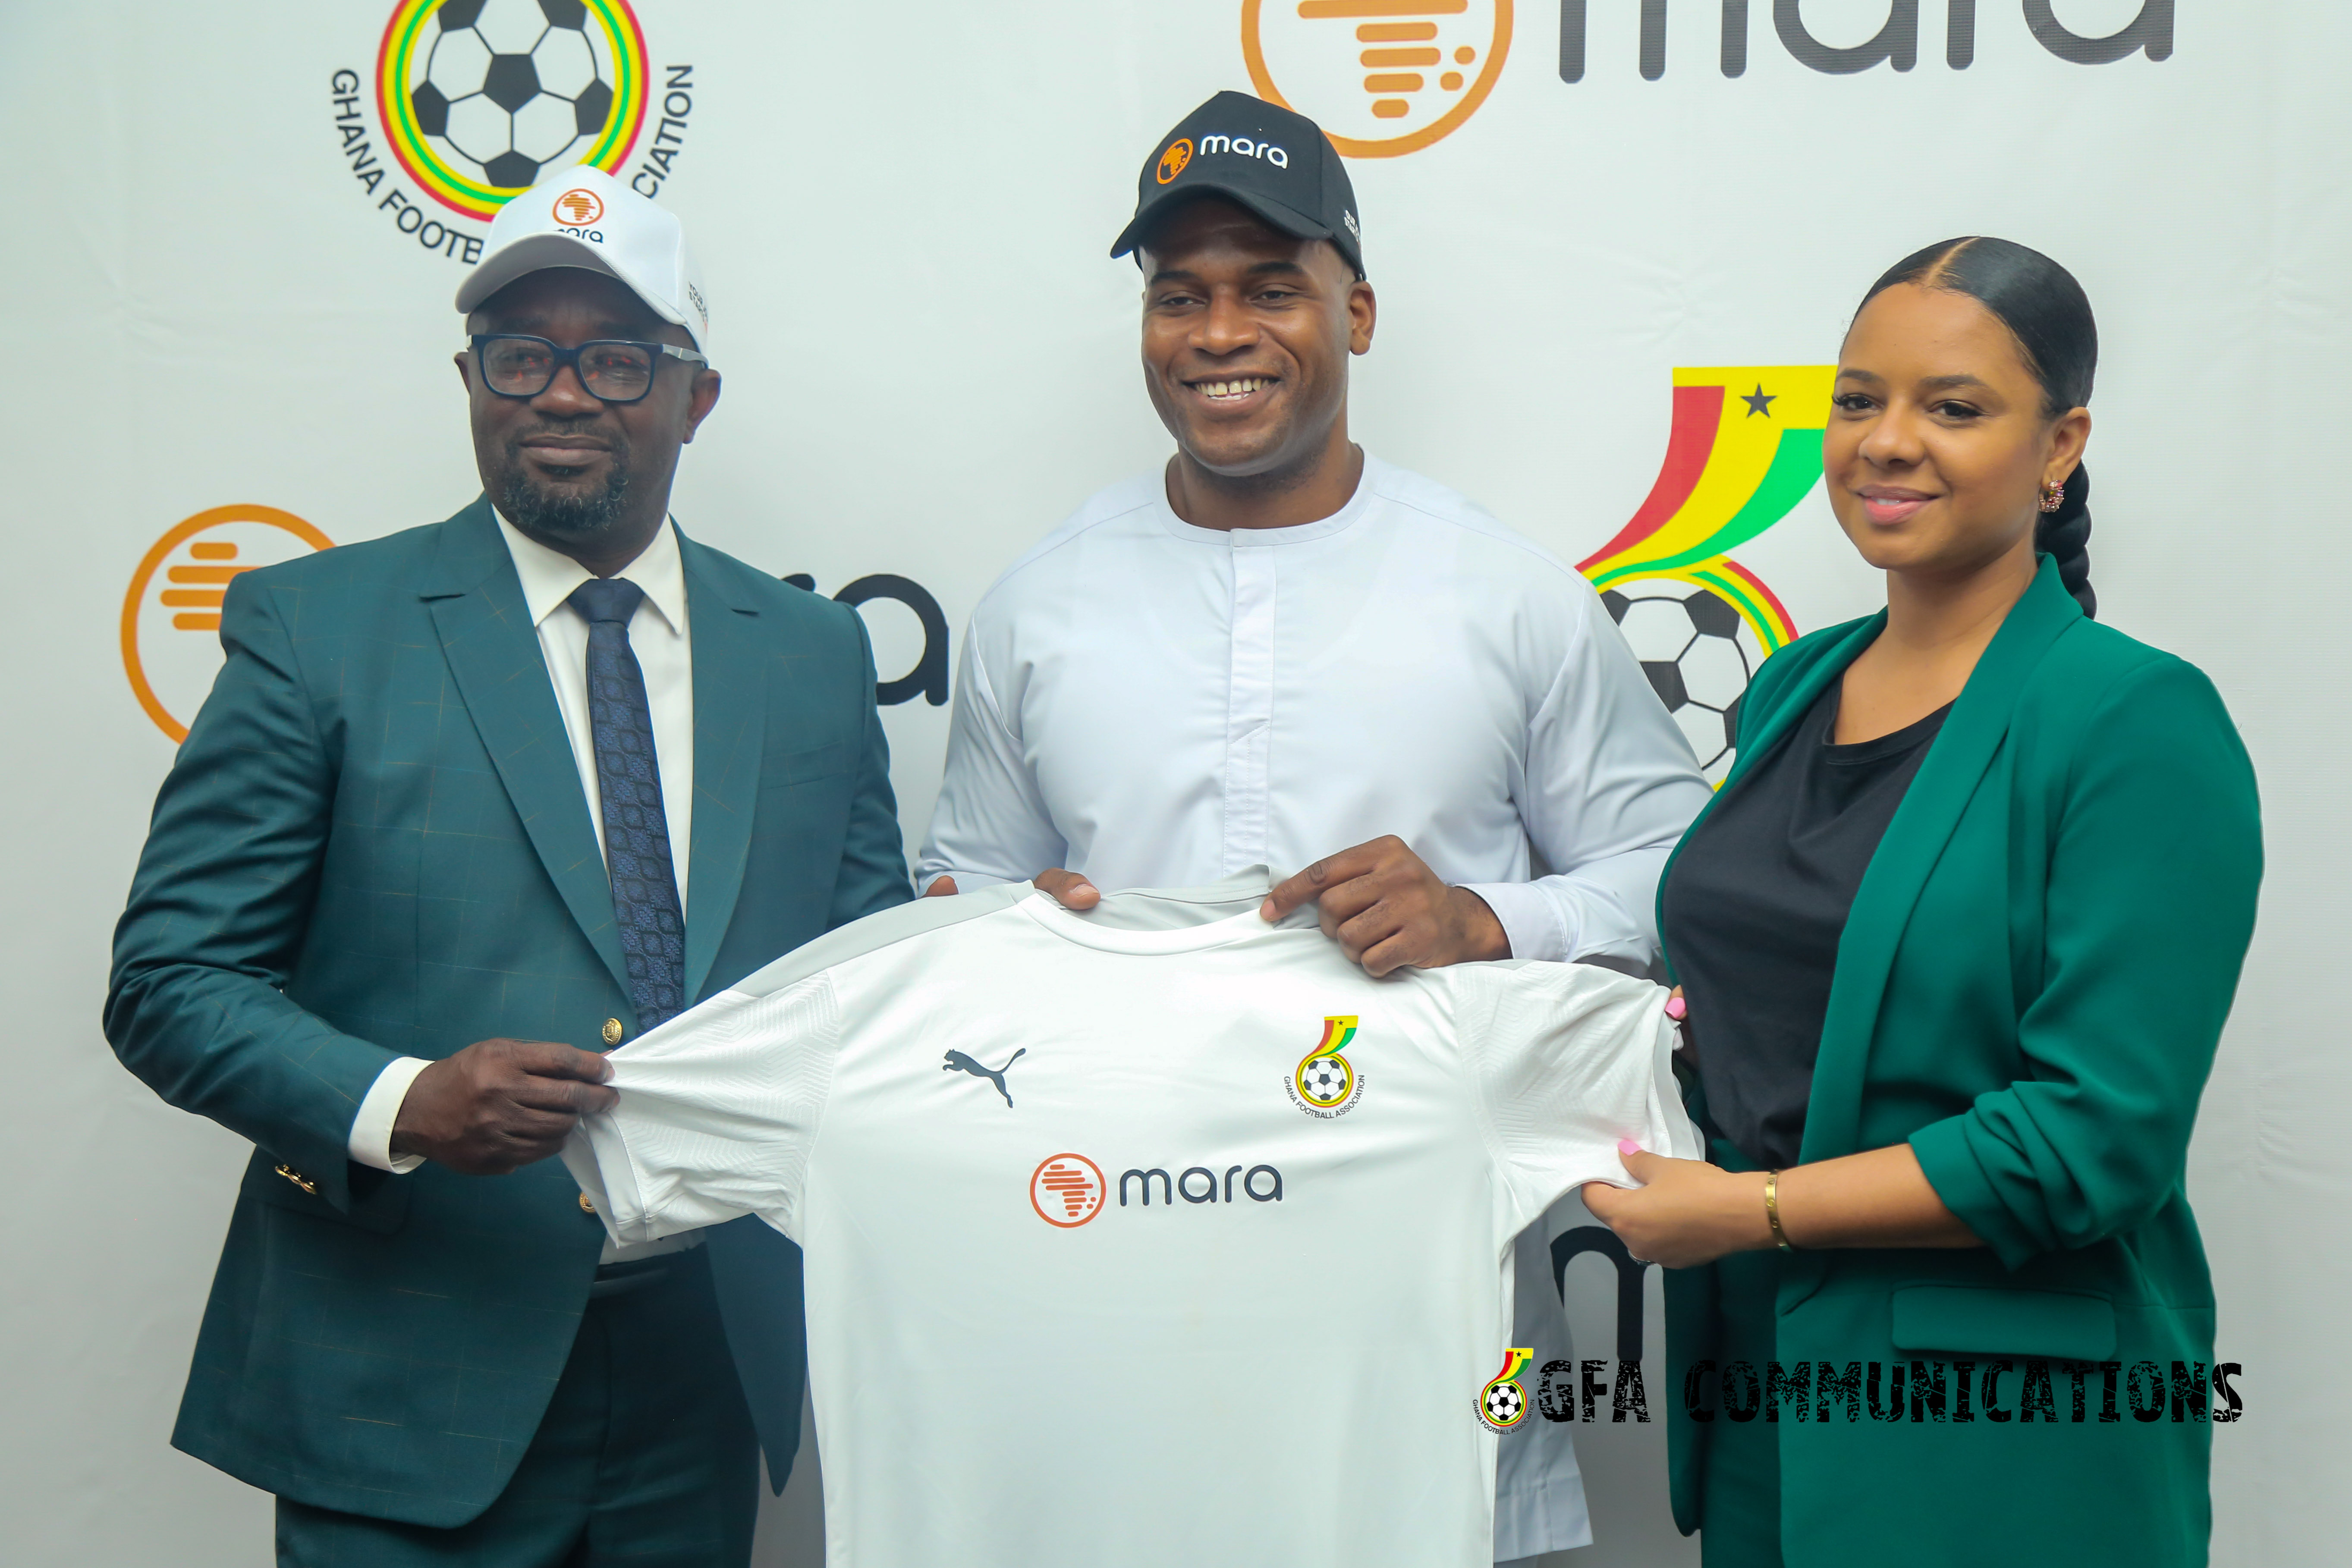 GFA unveils Mara as official partner of Black Stars for FIFA World Cup Qatar 2022